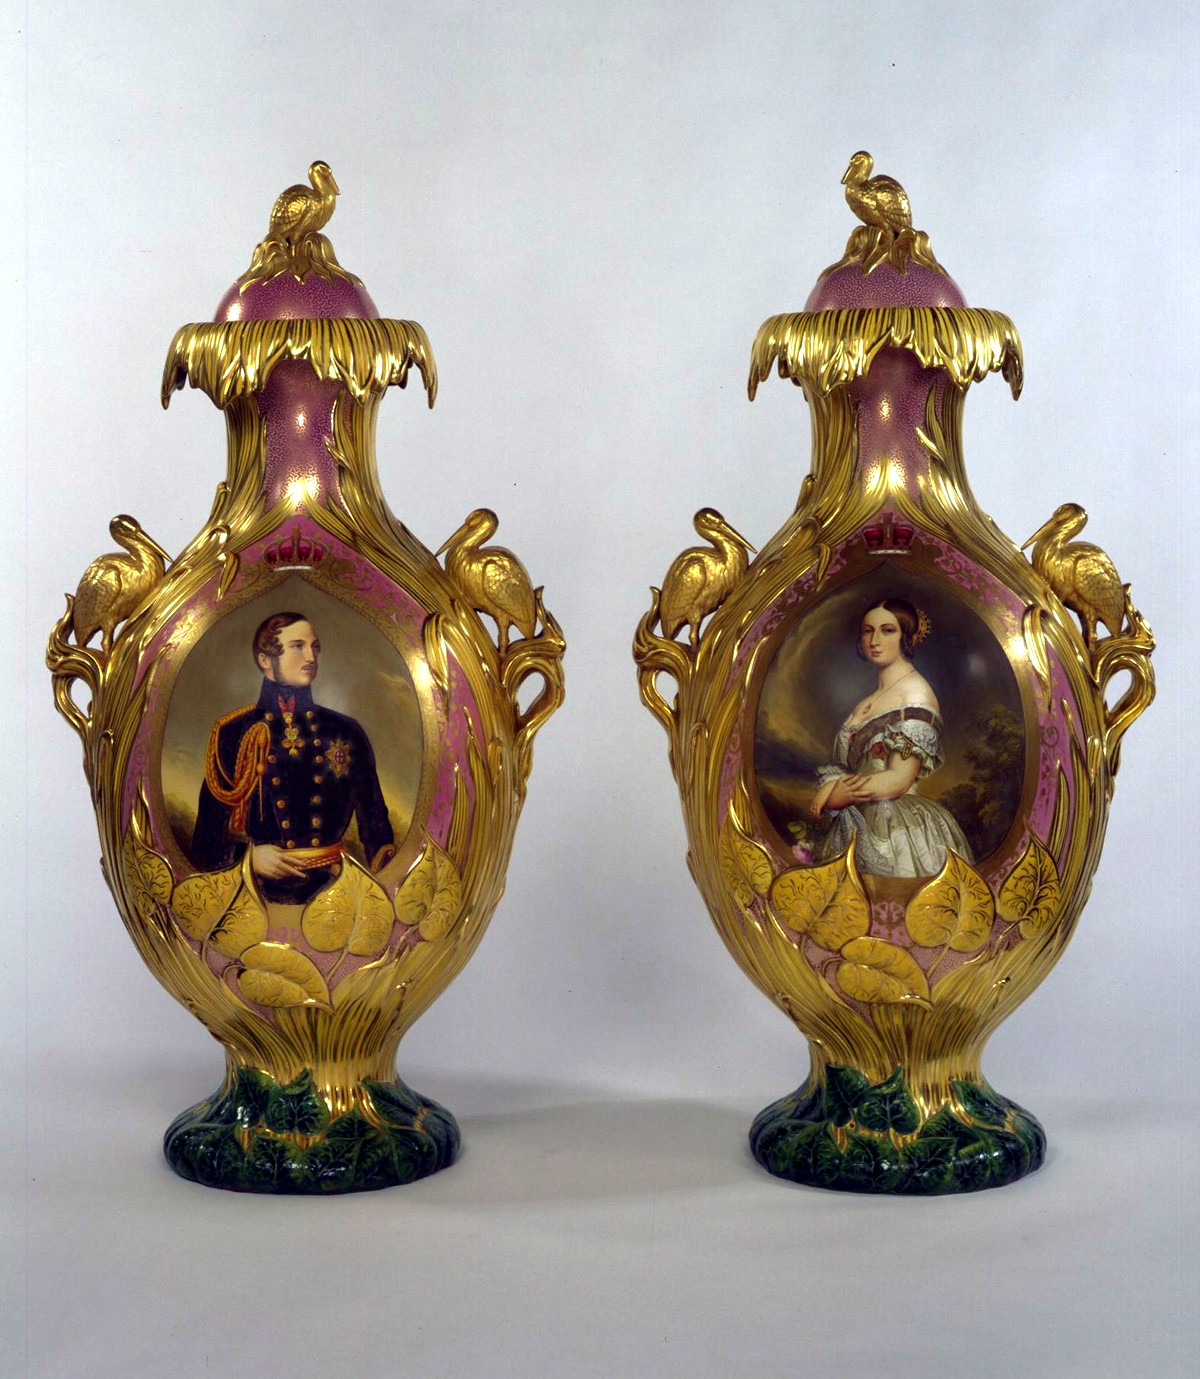 One of a pair of extravagant vases with finely painted views of the Crystal Palace on one side, and patriotic portraits of the Queen and Prince Consort on the other. © Victoria and Albert Museum, London